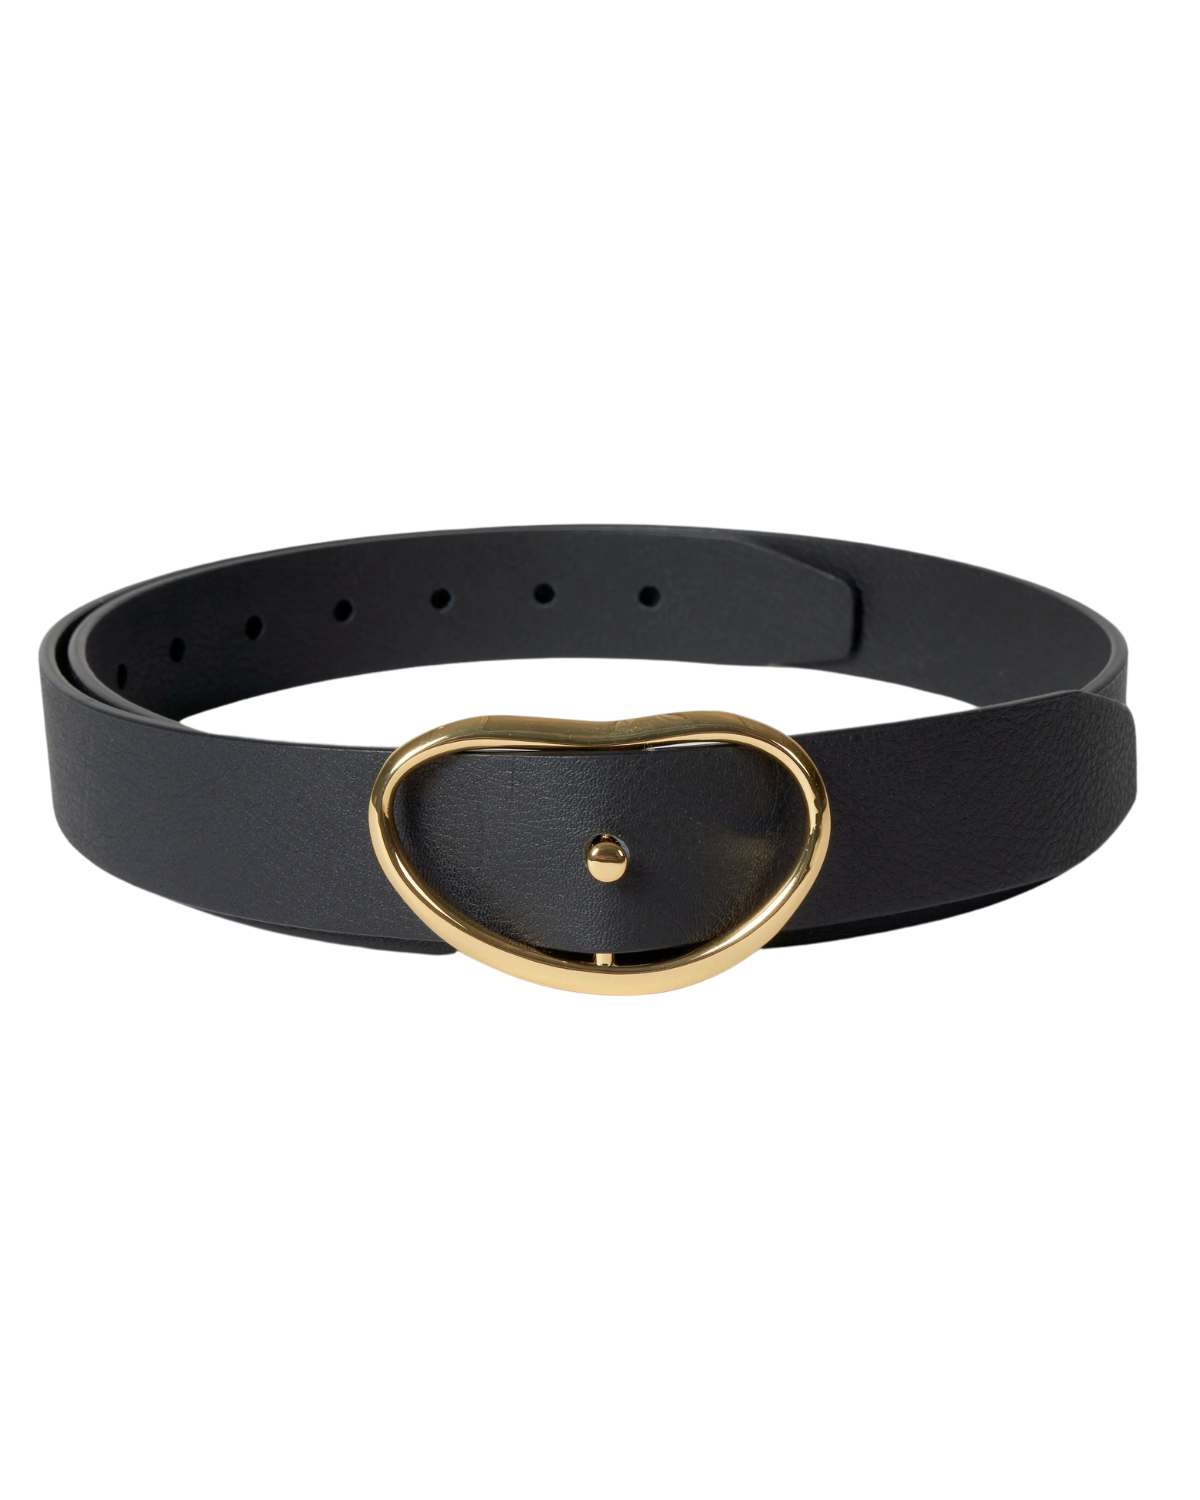 Wide Georgia Belt with Gold Buckle (Black)